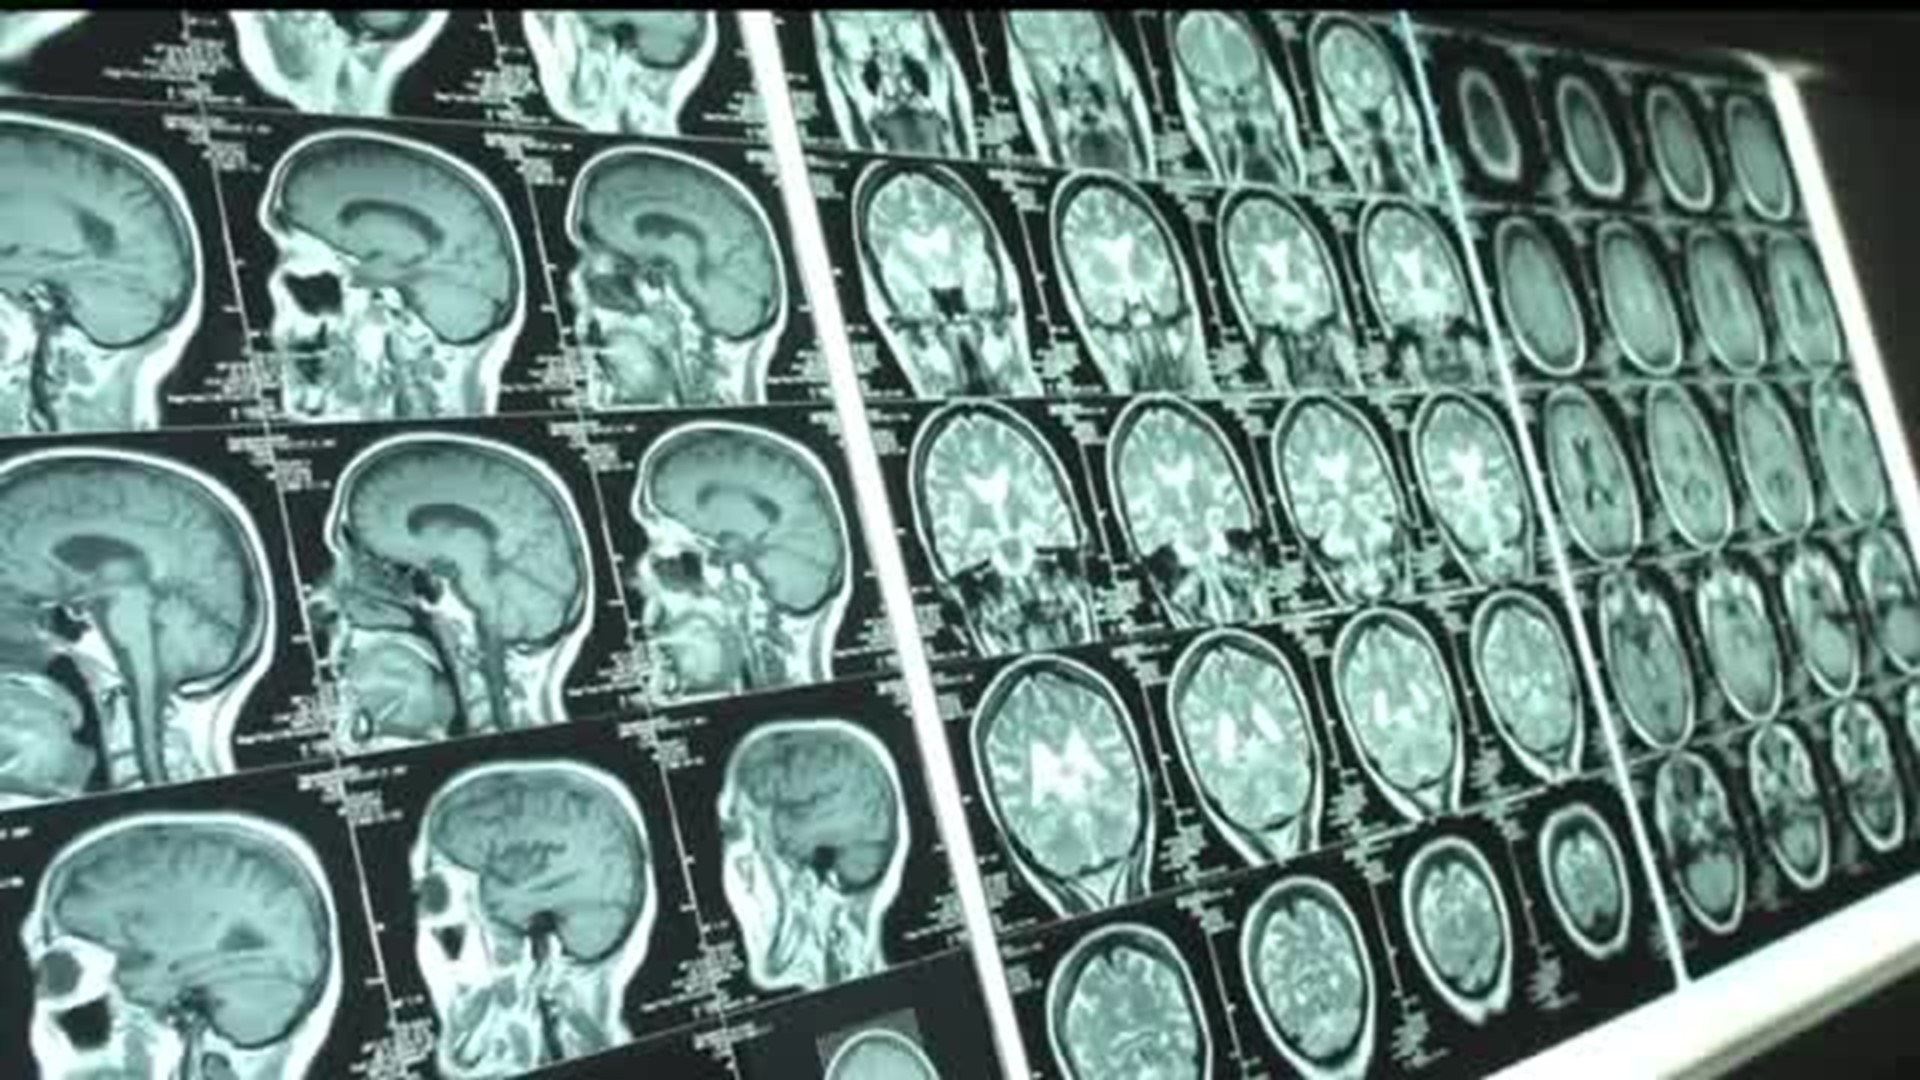 Study examines brain damage in football players